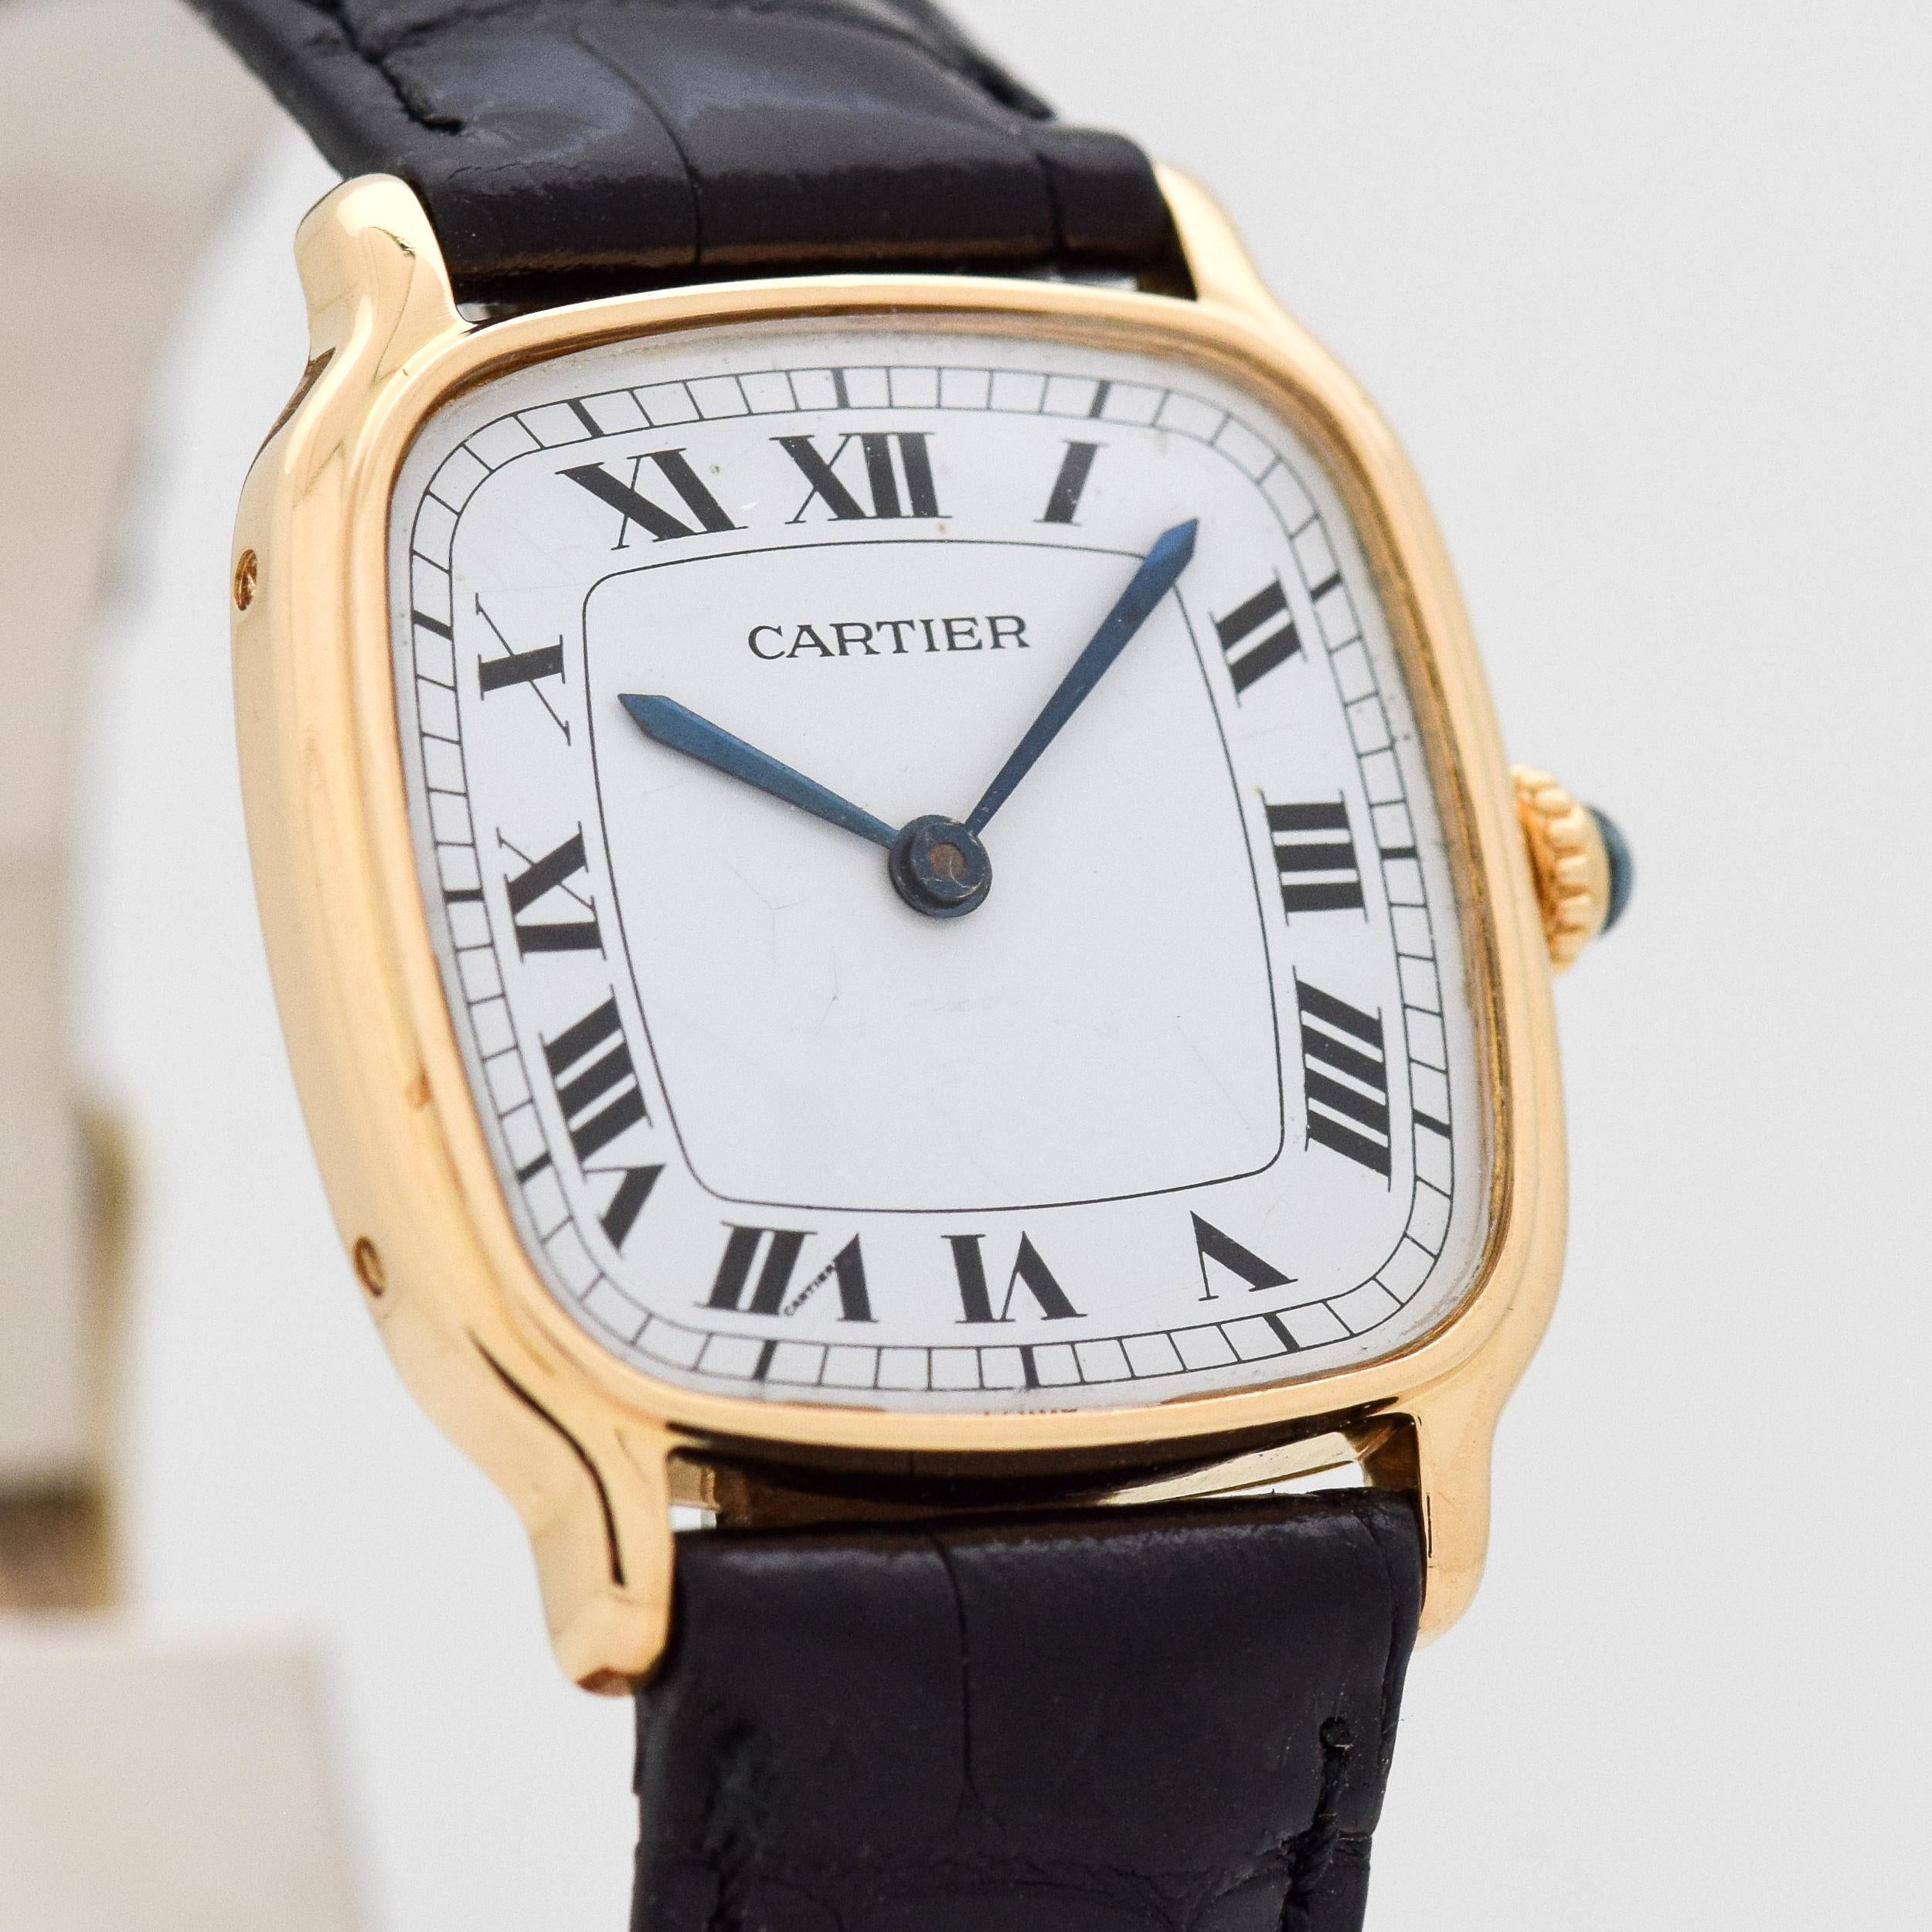 2010's Cartier 18k Yellow Gold Cushion Shape watch with Original White Dial with Black Roman Numerals. 26mm x 30mm lug to lug (1.02 in. x 1.18 in.) - 17 jewel, manual caliber ETA movement. 100% Genuine Alligator Glossy Black Strap. Suitable for a